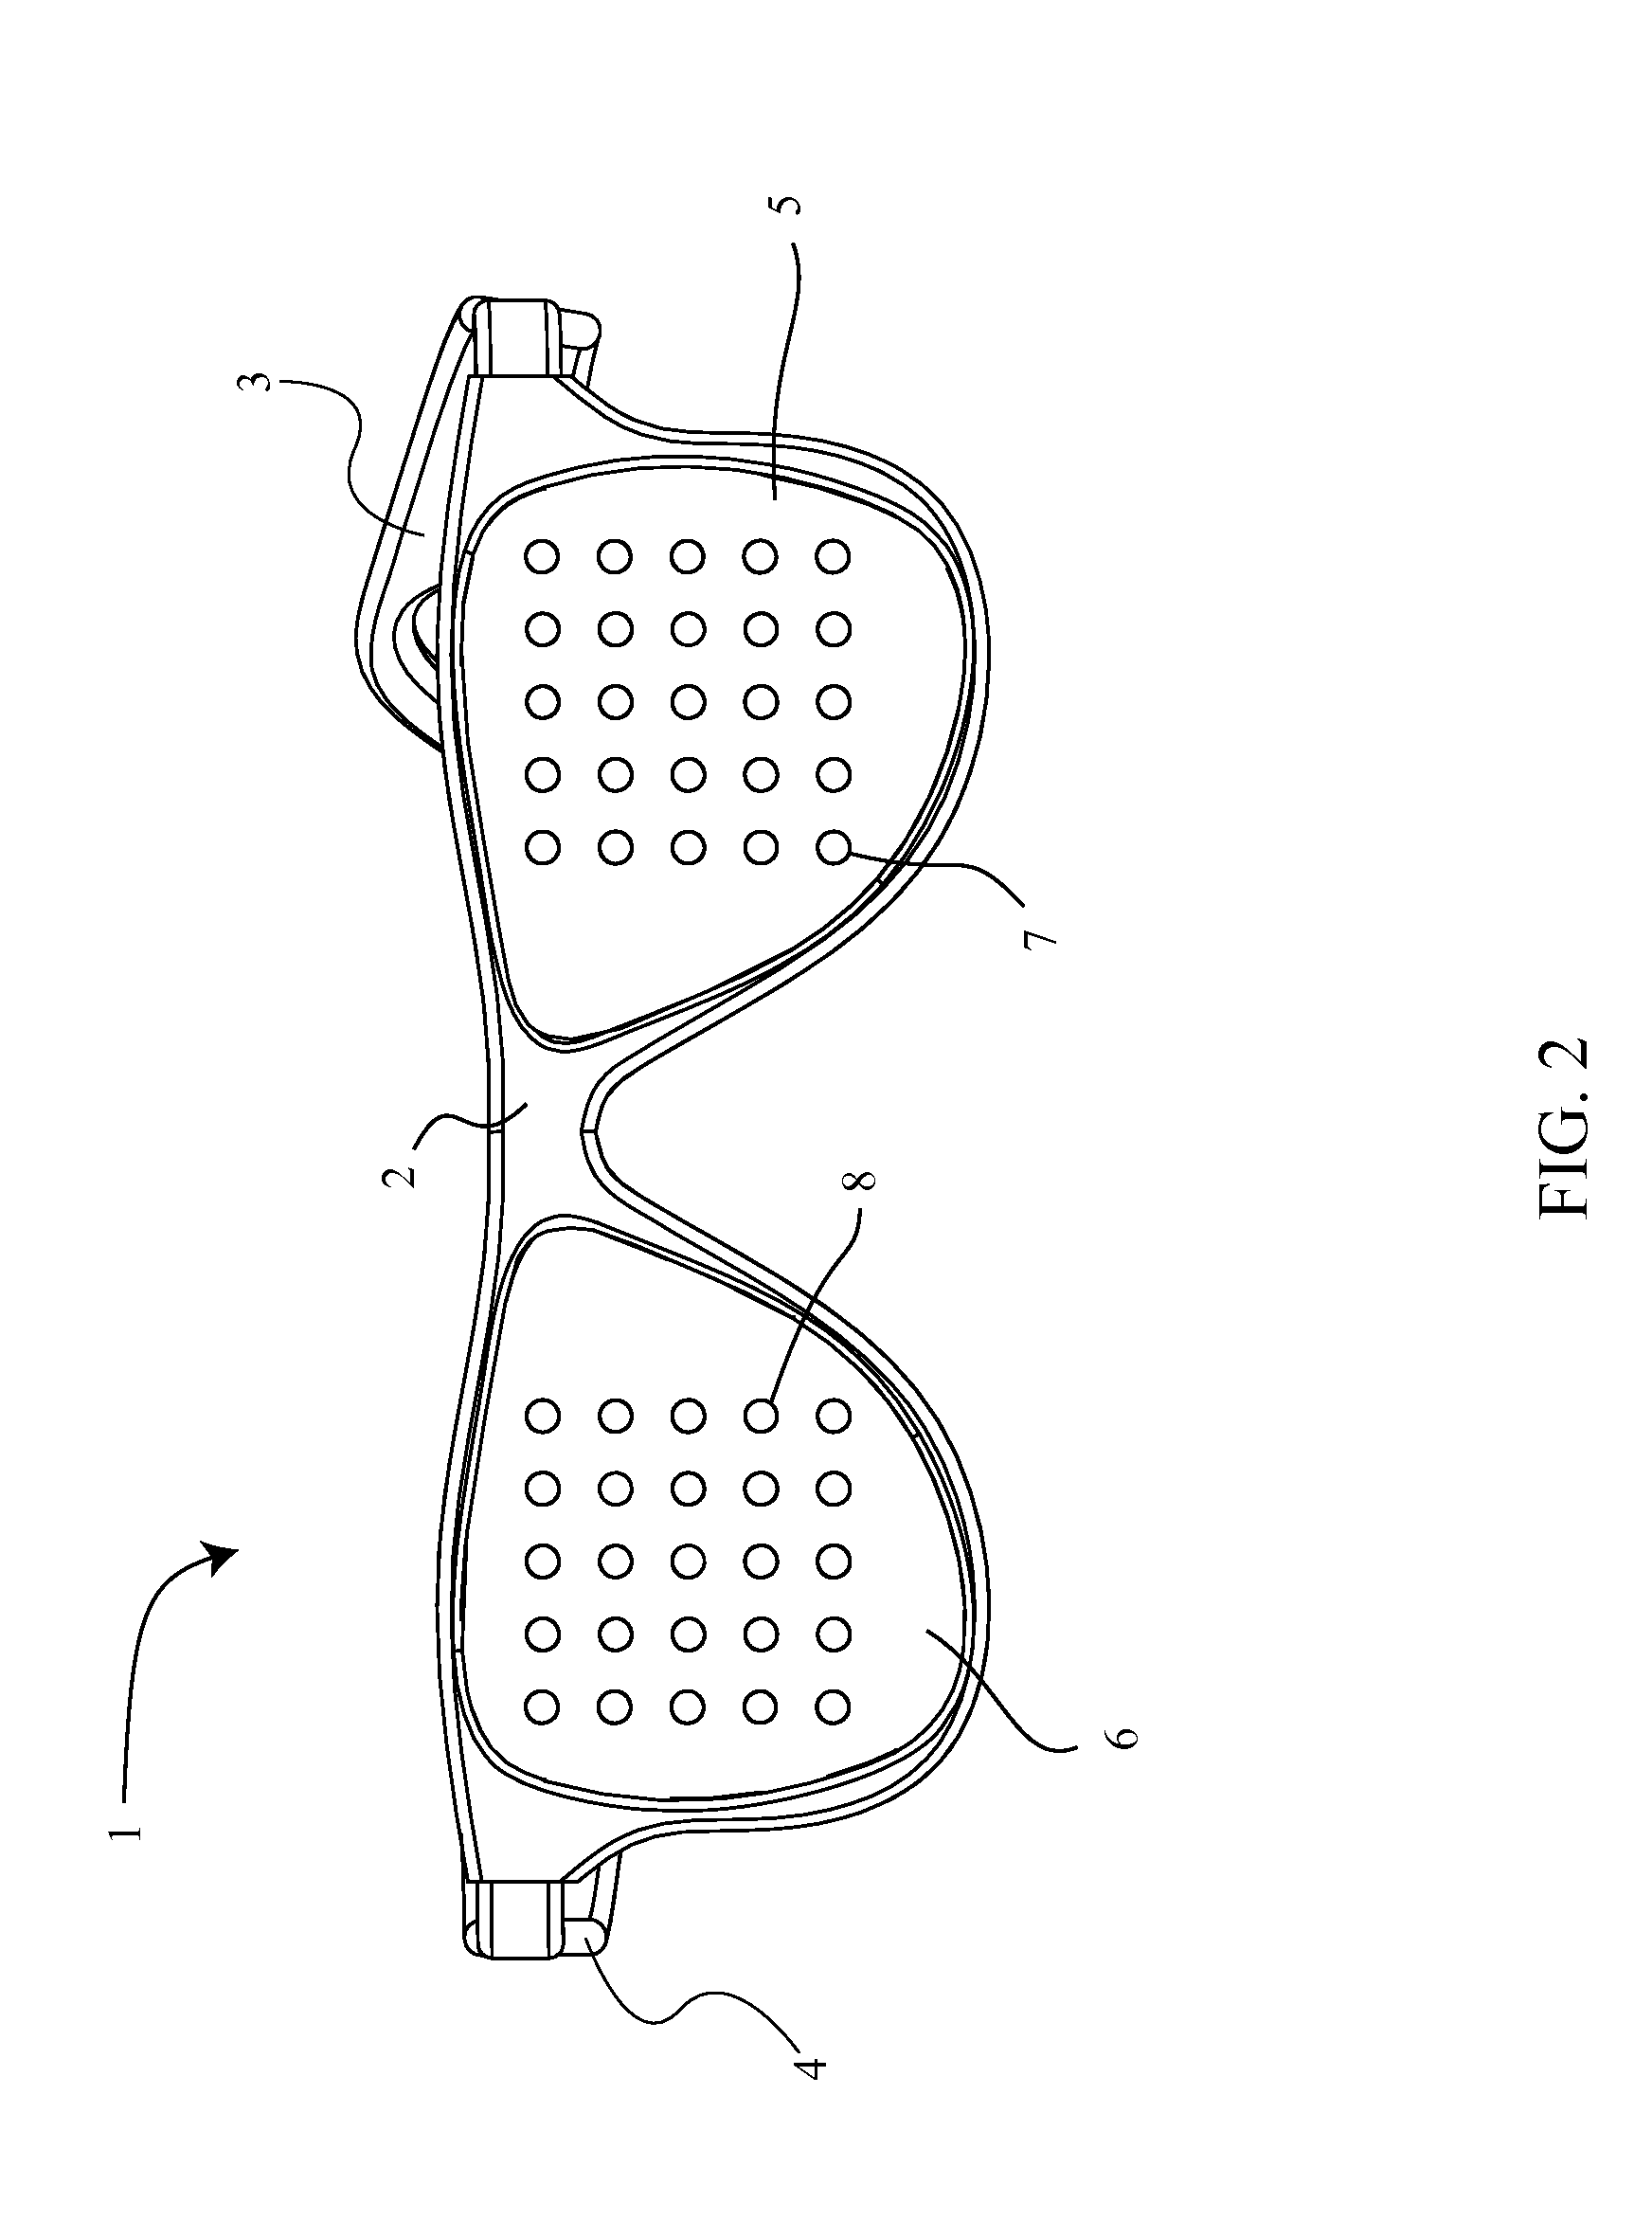 Eyewear with a Pair of Light Emitting Diode Matrices